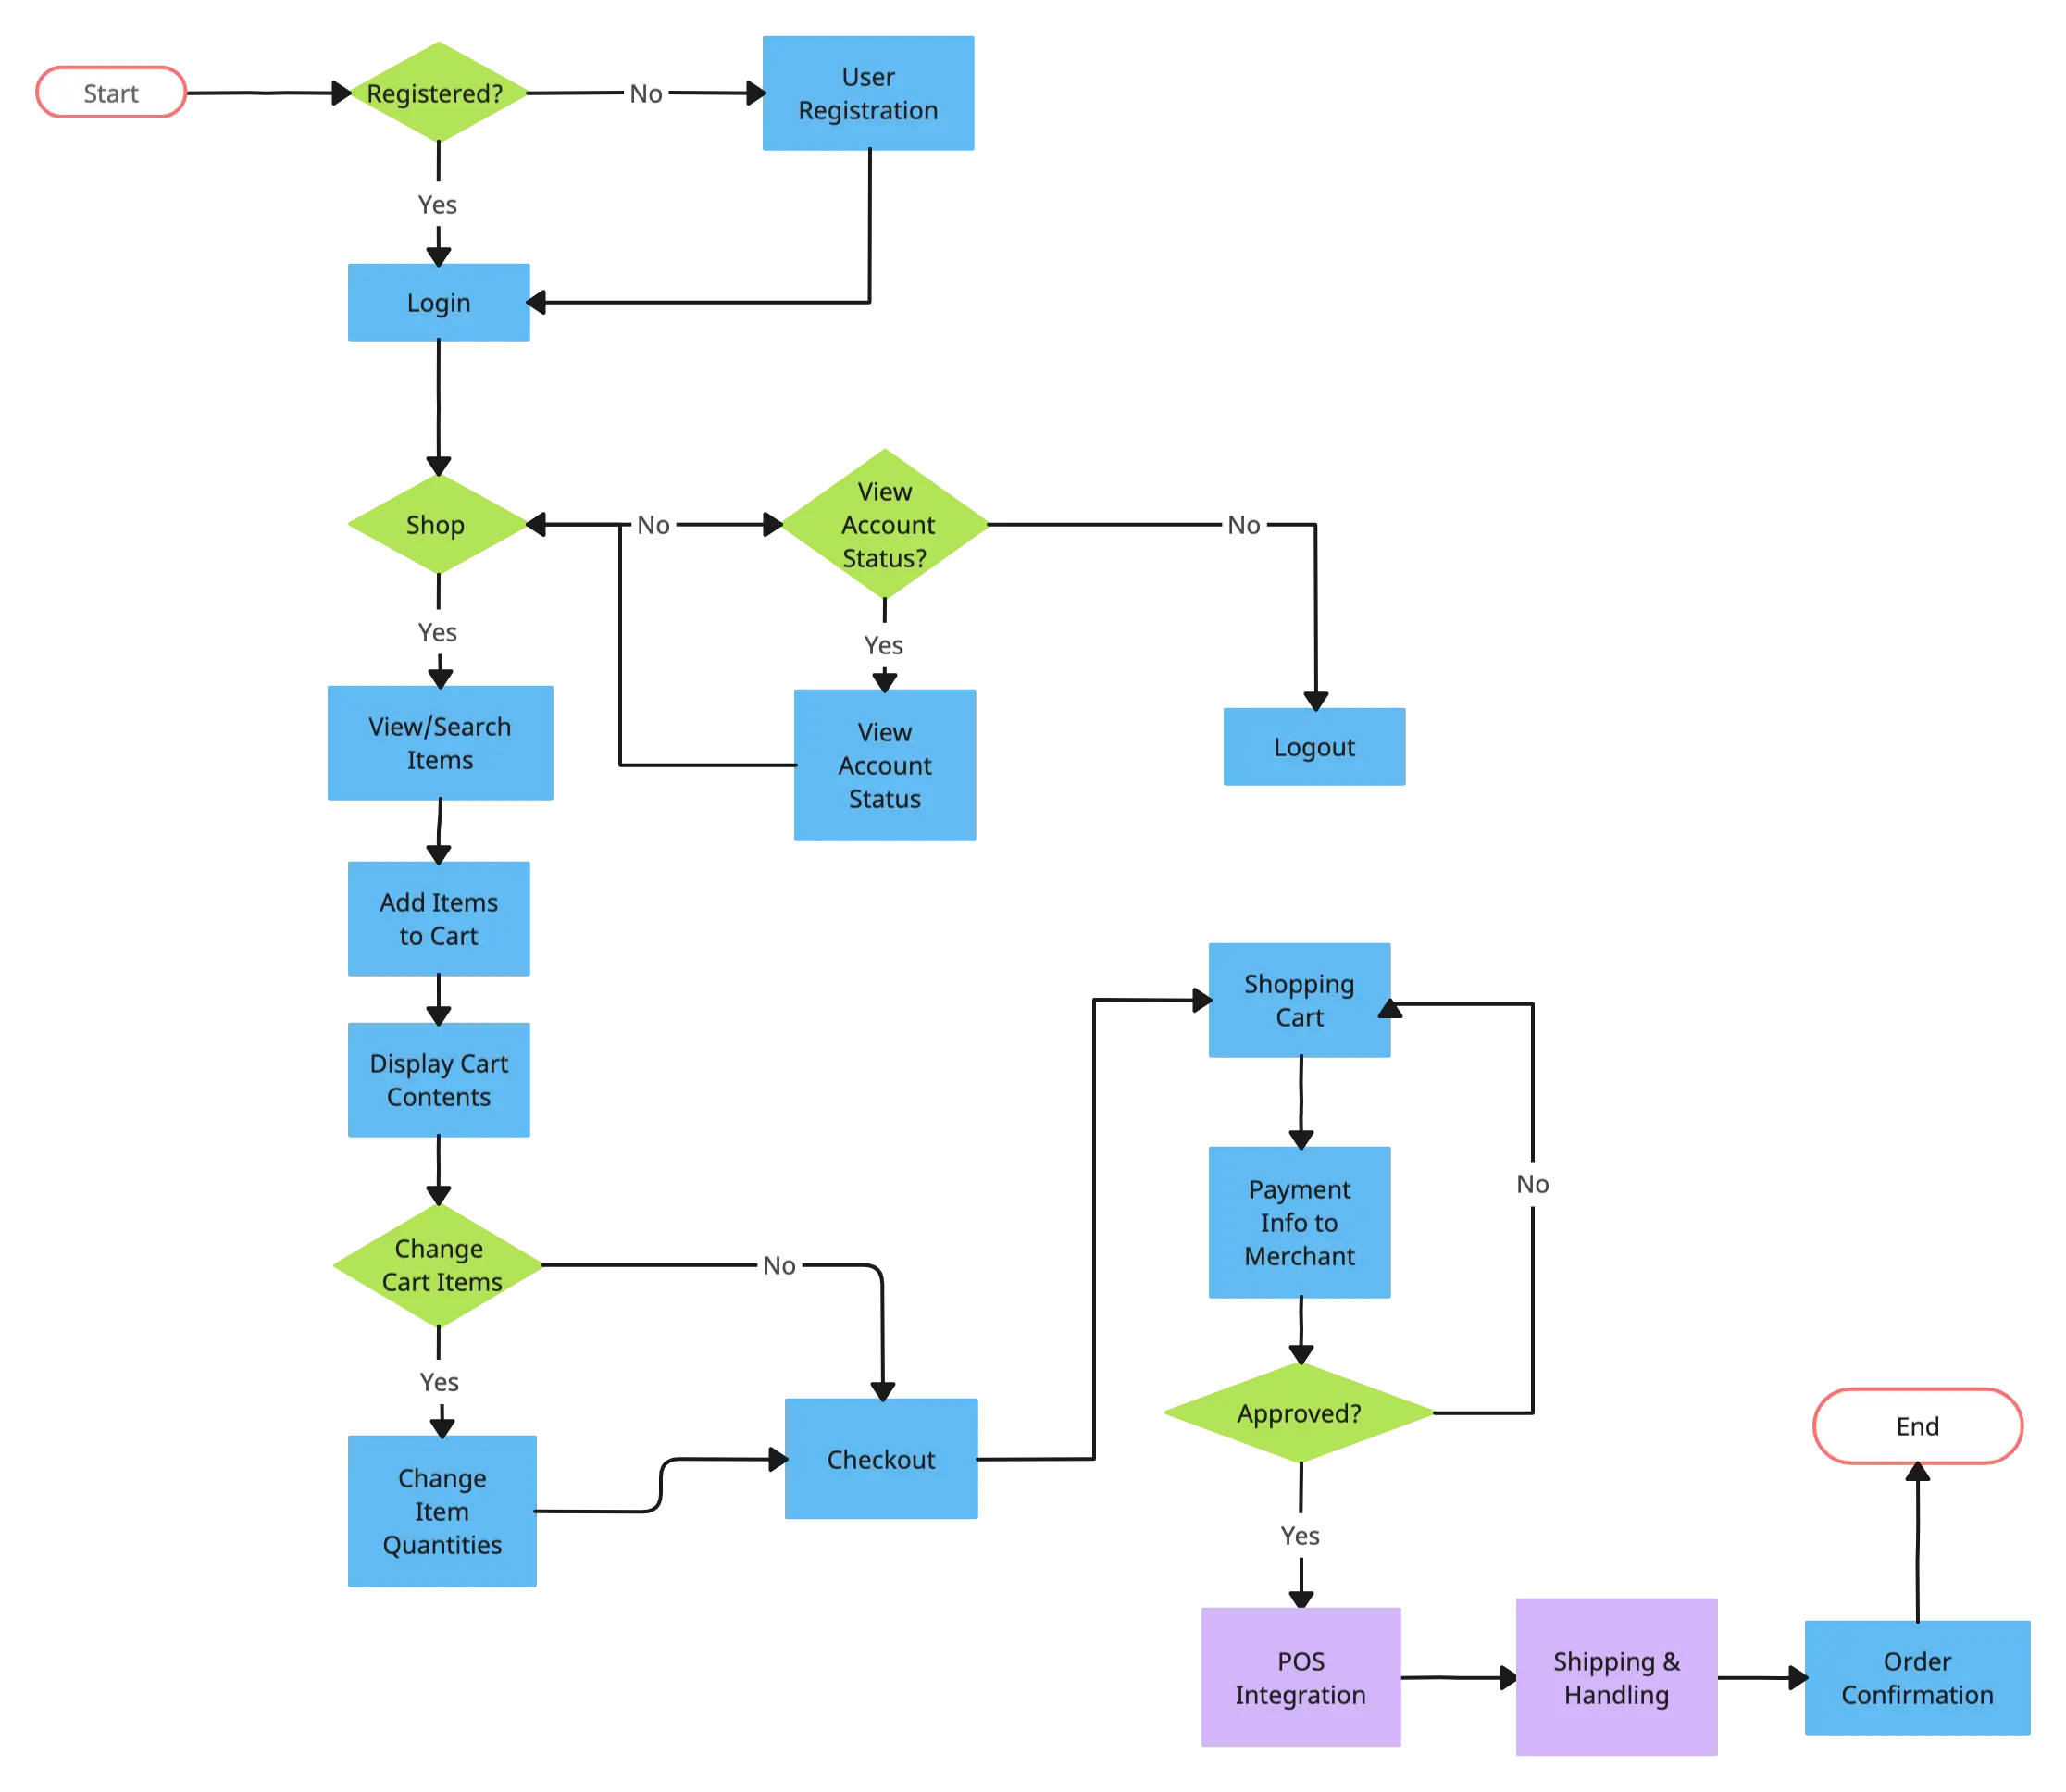 How To Make A User Flow Diagram | Creately